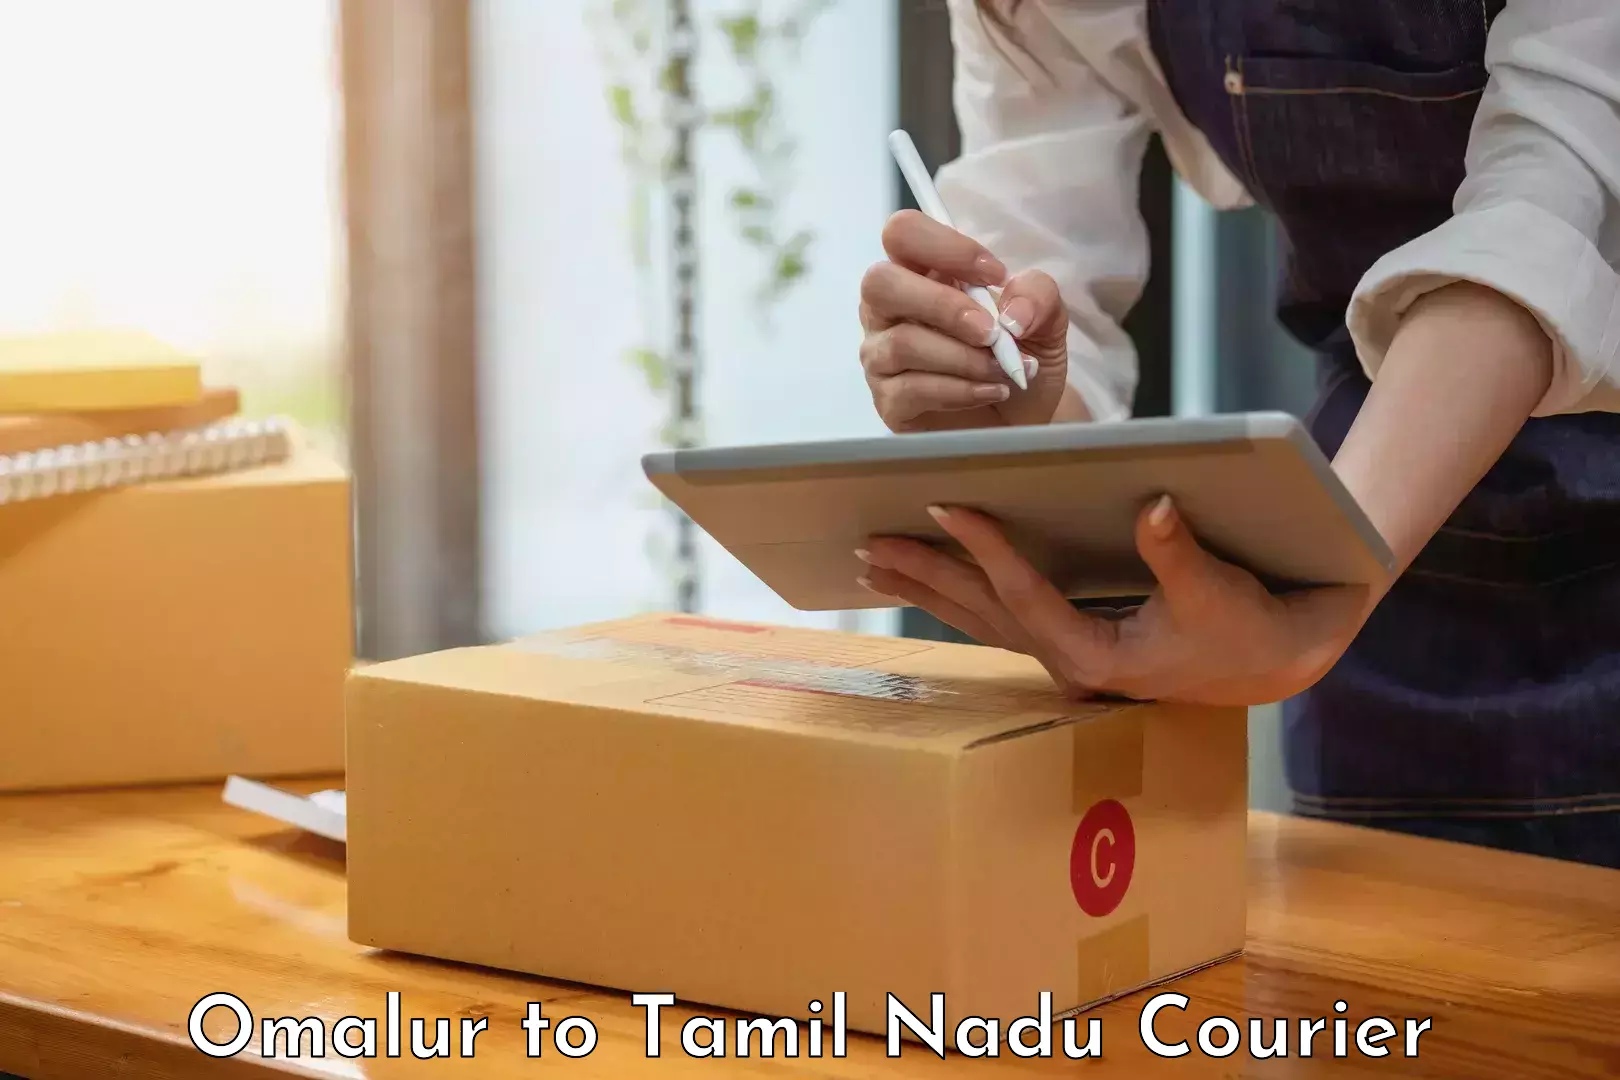 Courier rate comparison Omalur to Rathinasabapathy Puram